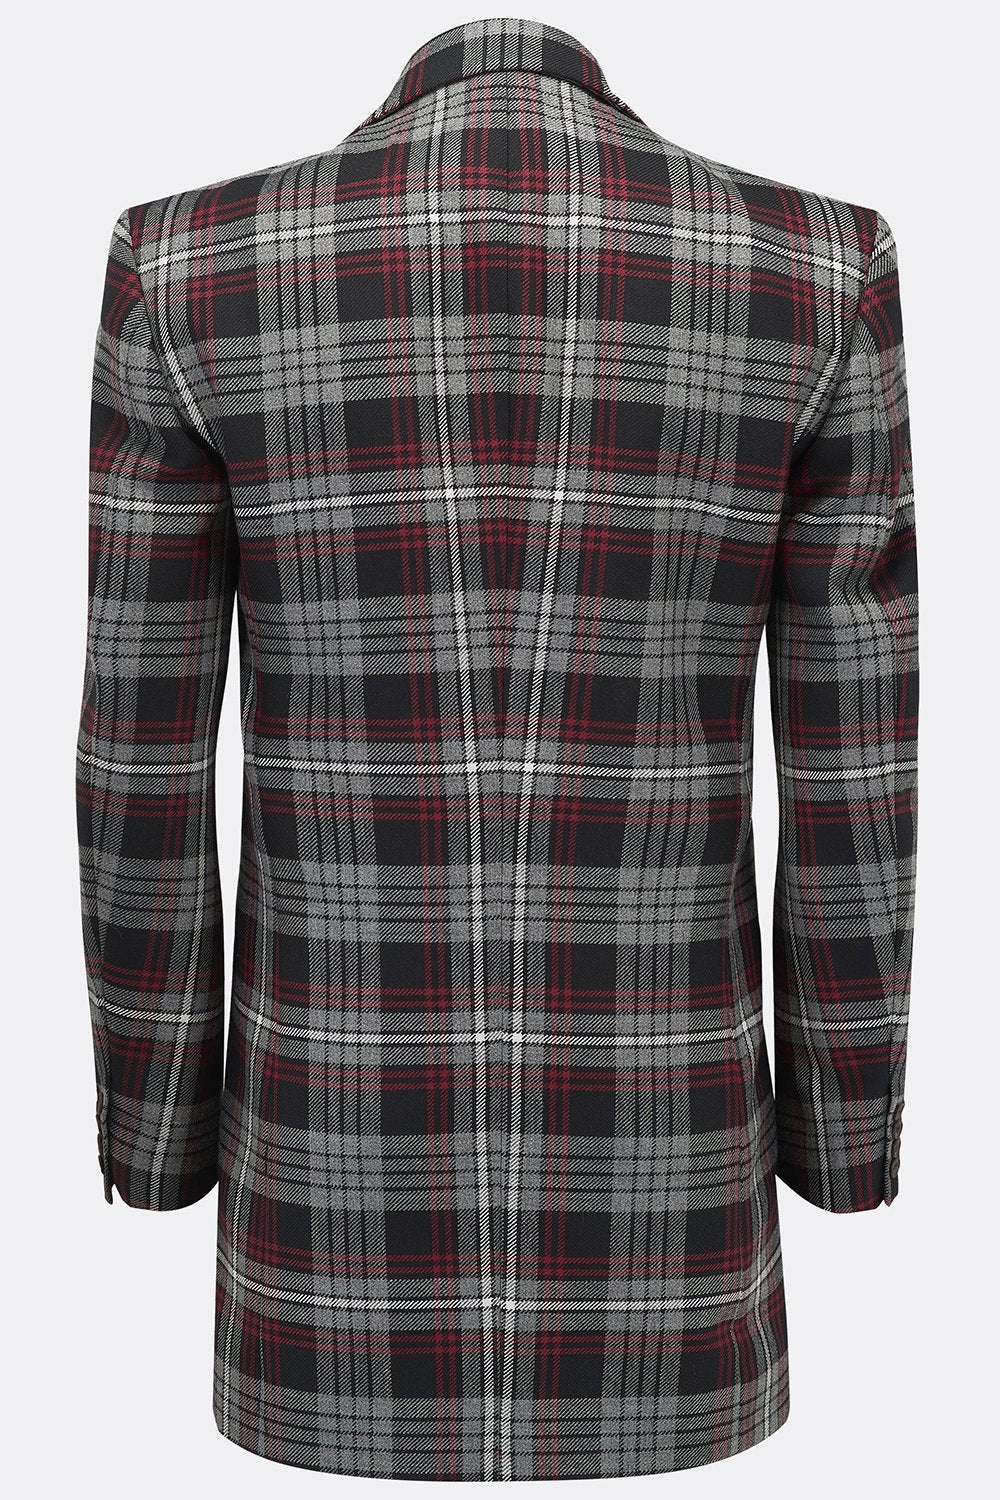 DILLINGER JACKET IN AULD LANG SYNE TARTAN (made to order)-menswear-A Child Of The Jago